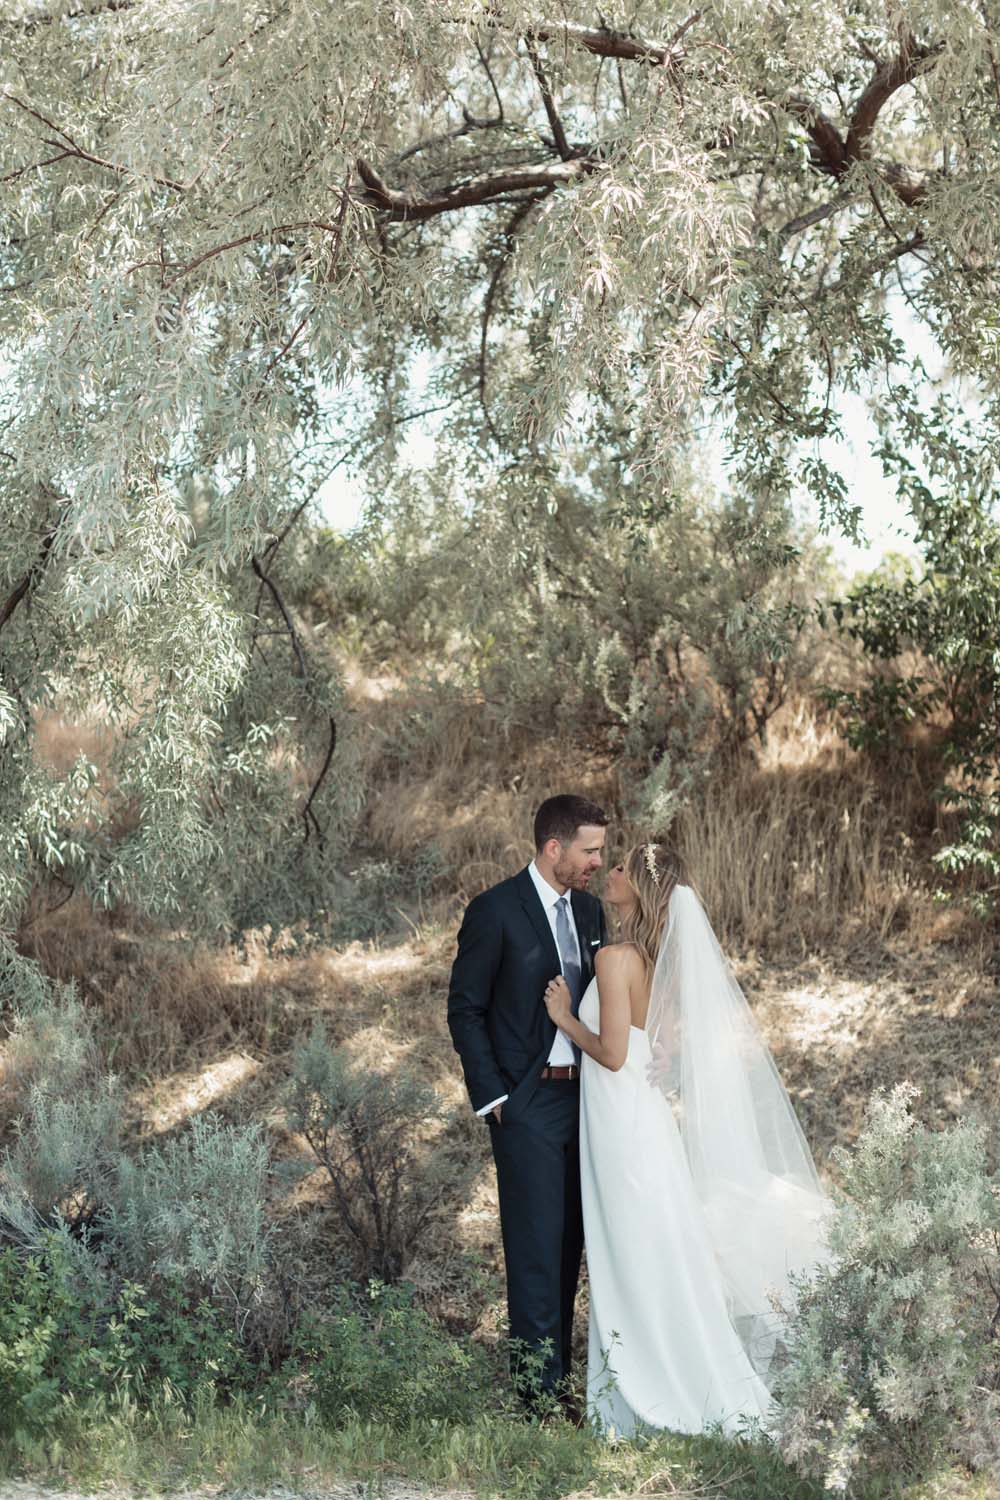 Jill Lansky of The August Diaries' Modern-Chic Wedding In British Columbia - bride and groom